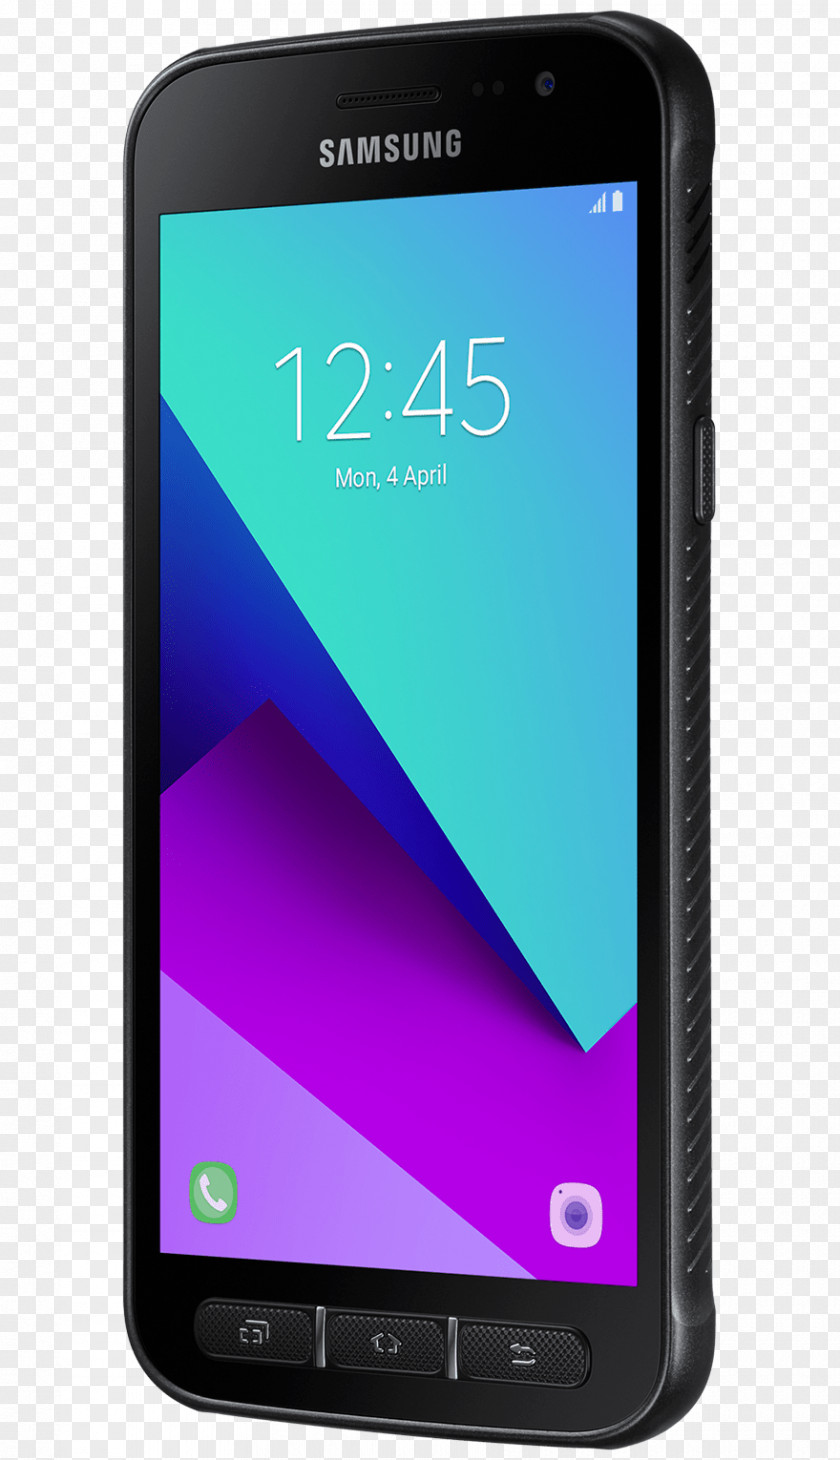 Samsung Galaxy Xcover A5 (2017) Smartphone Telephone PNG